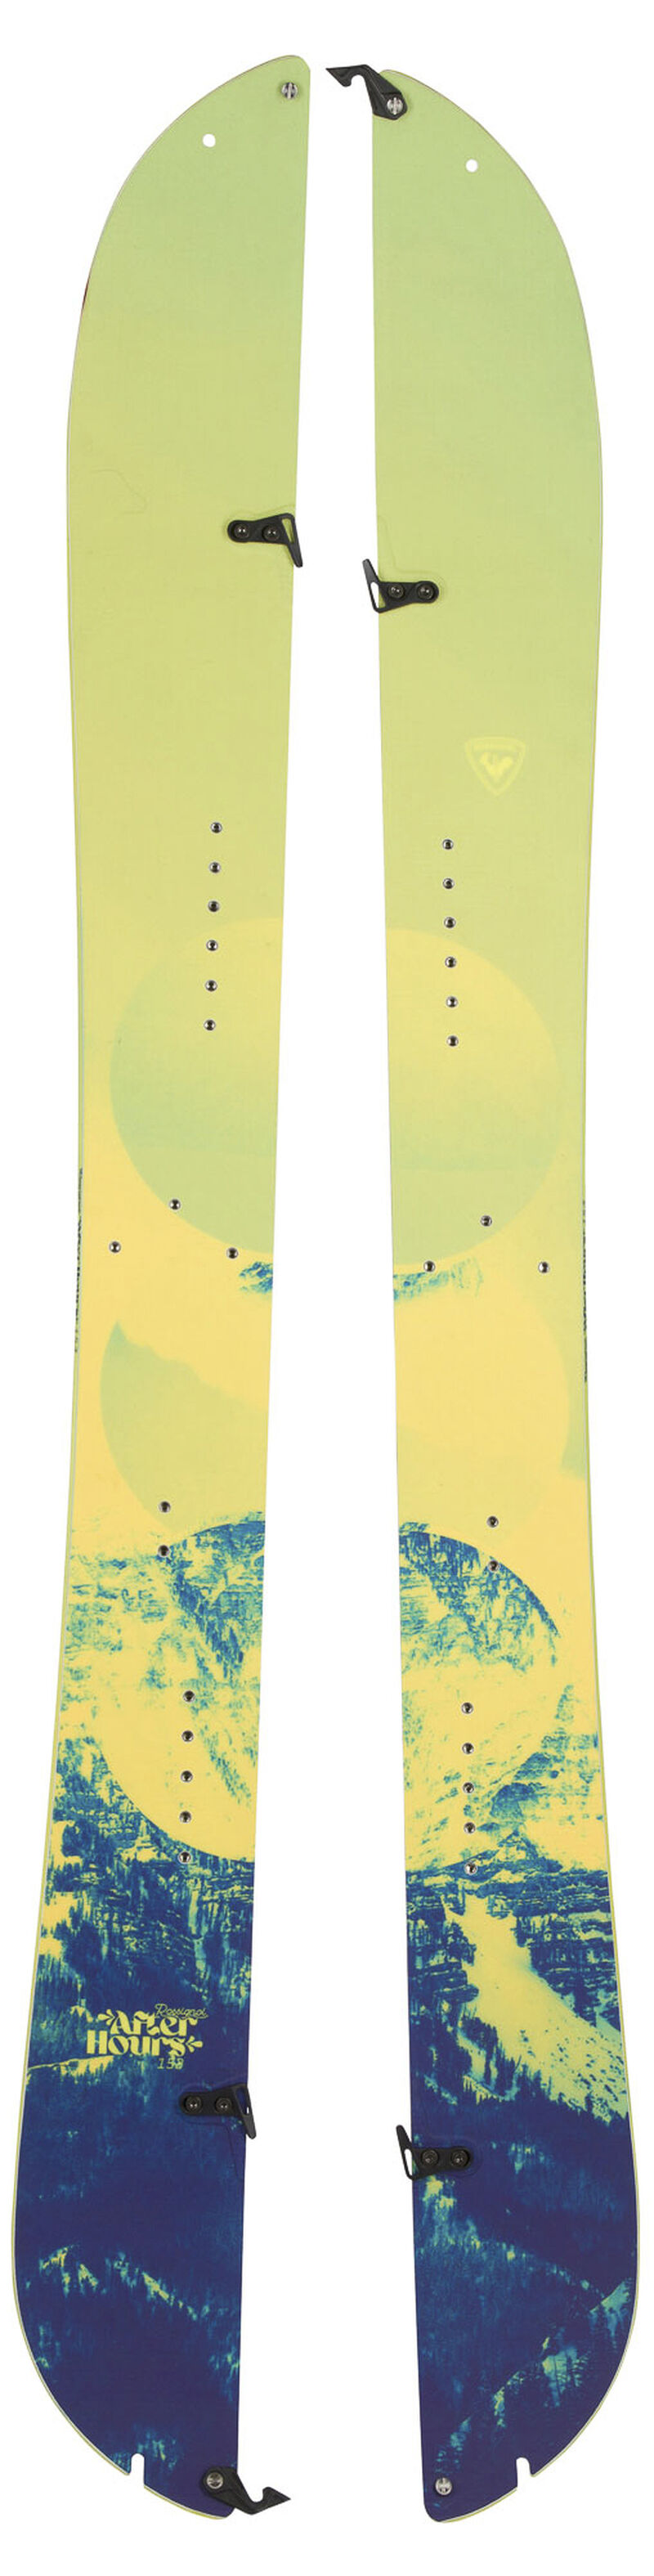 Rossignol After Hours snowboard femme 21 - Echo sports